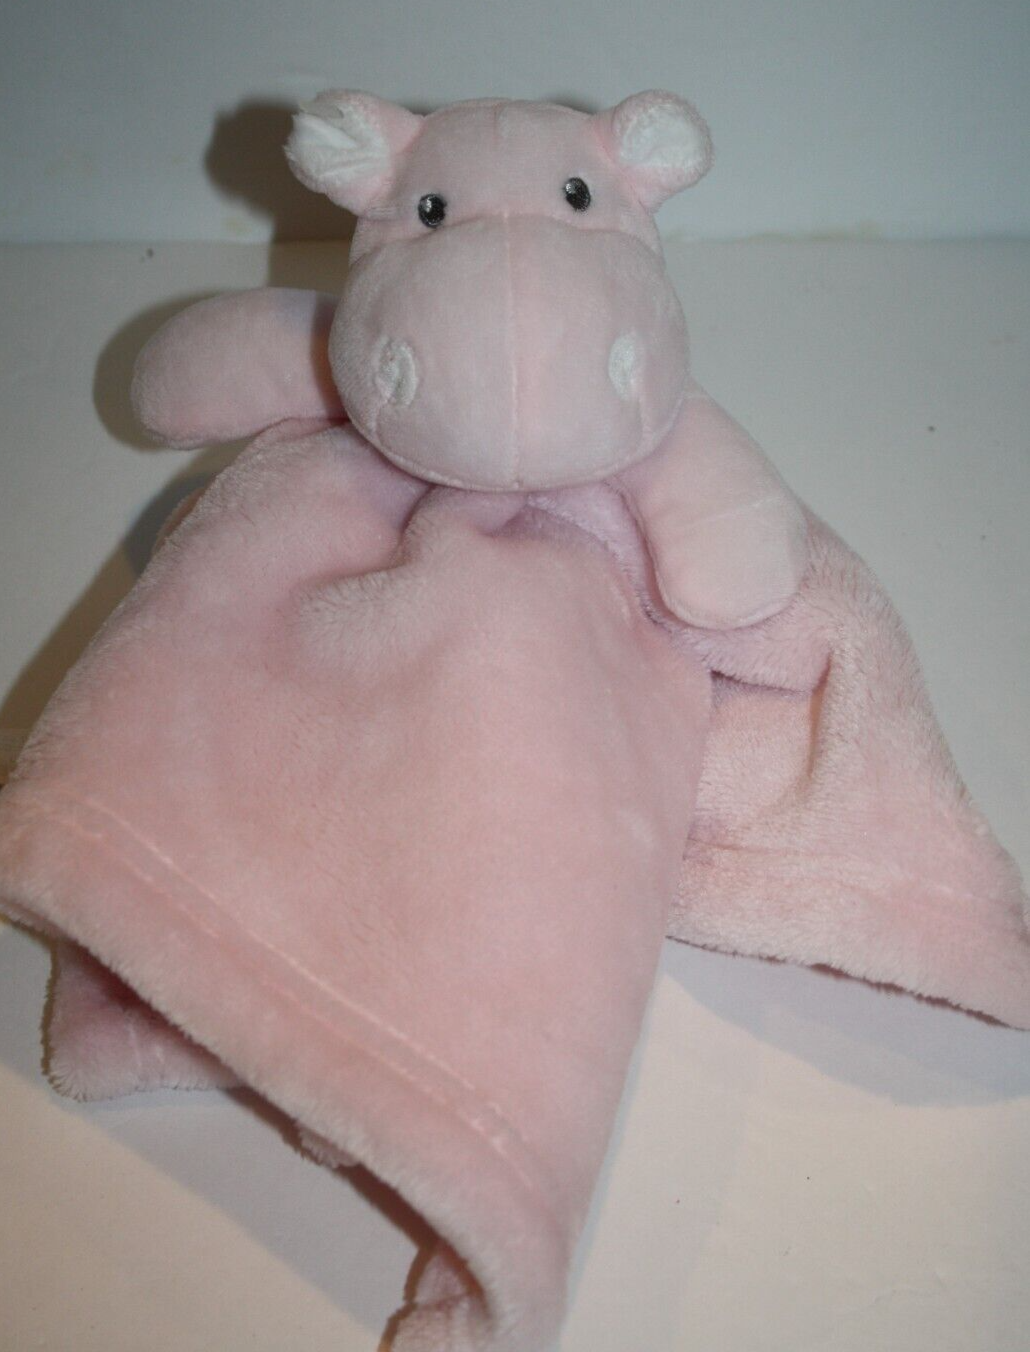 Blankets & Beyond Pink Hippo Nunu Baby Lovey Security Blanket Soft Toy 13" 2019 - $18.39